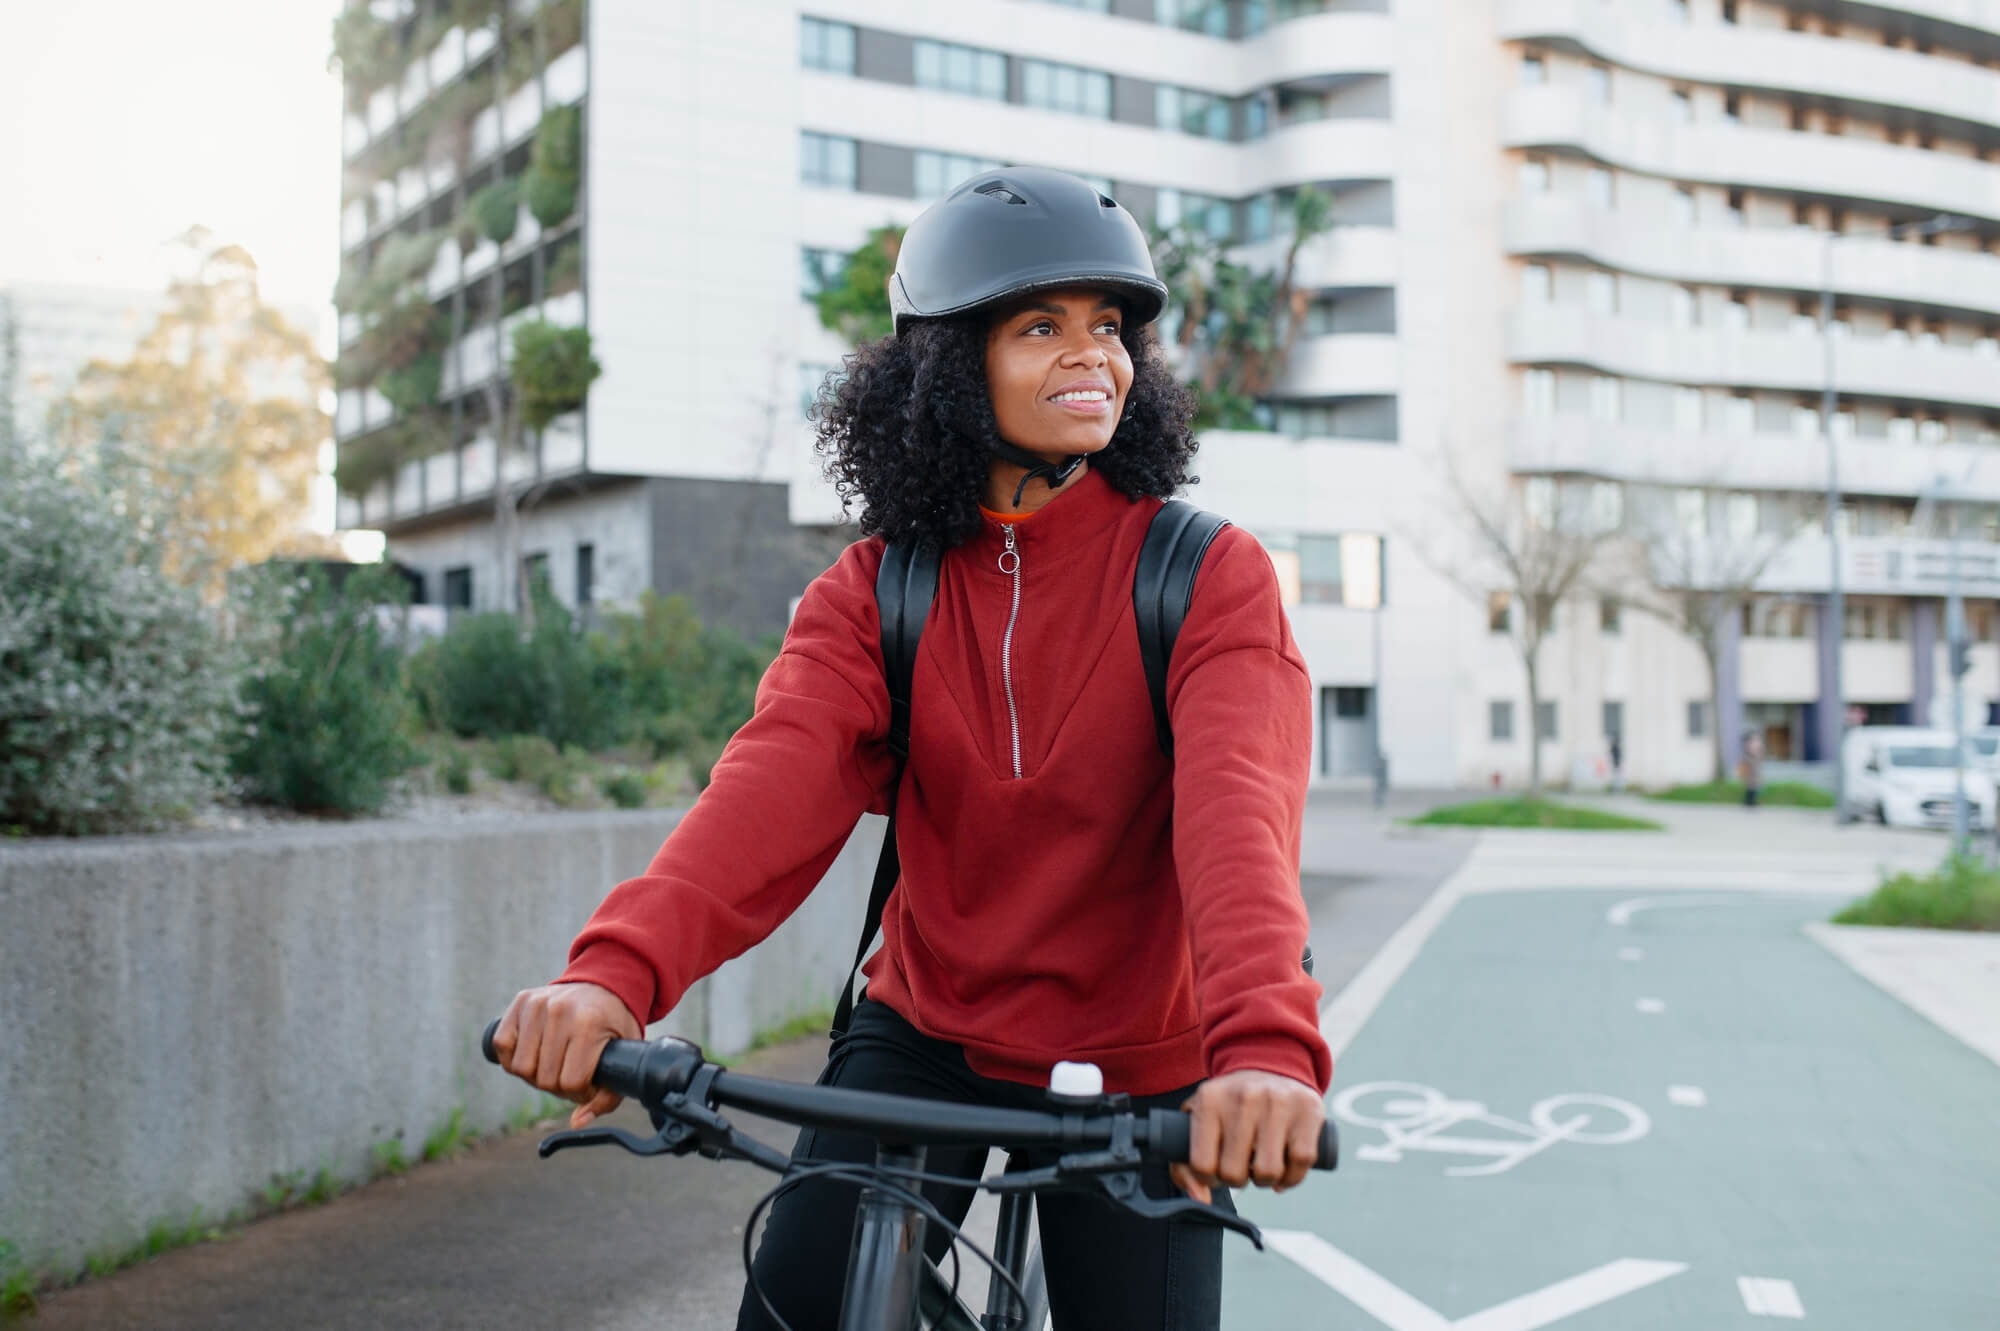 Woman riding bicycle with bicycle helmet around town